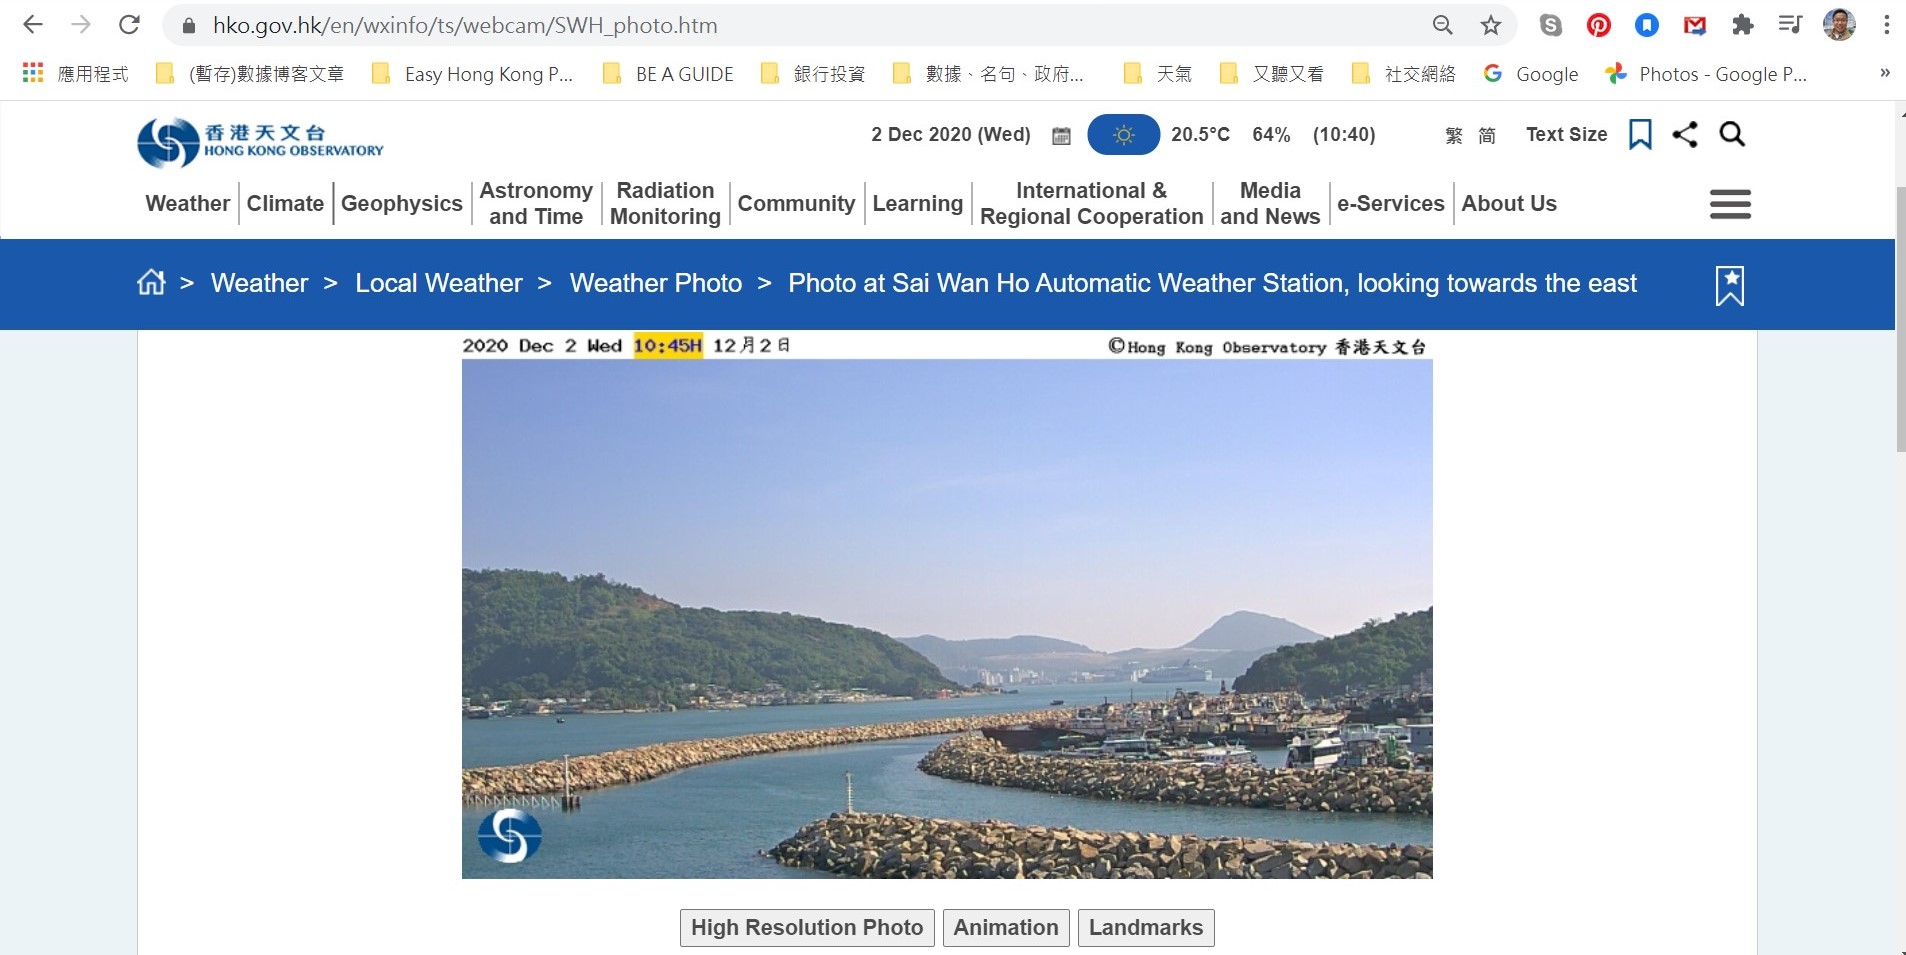 Sai Wan Ho weather photo shows you the fishing village and Lei Yue Mun Straits